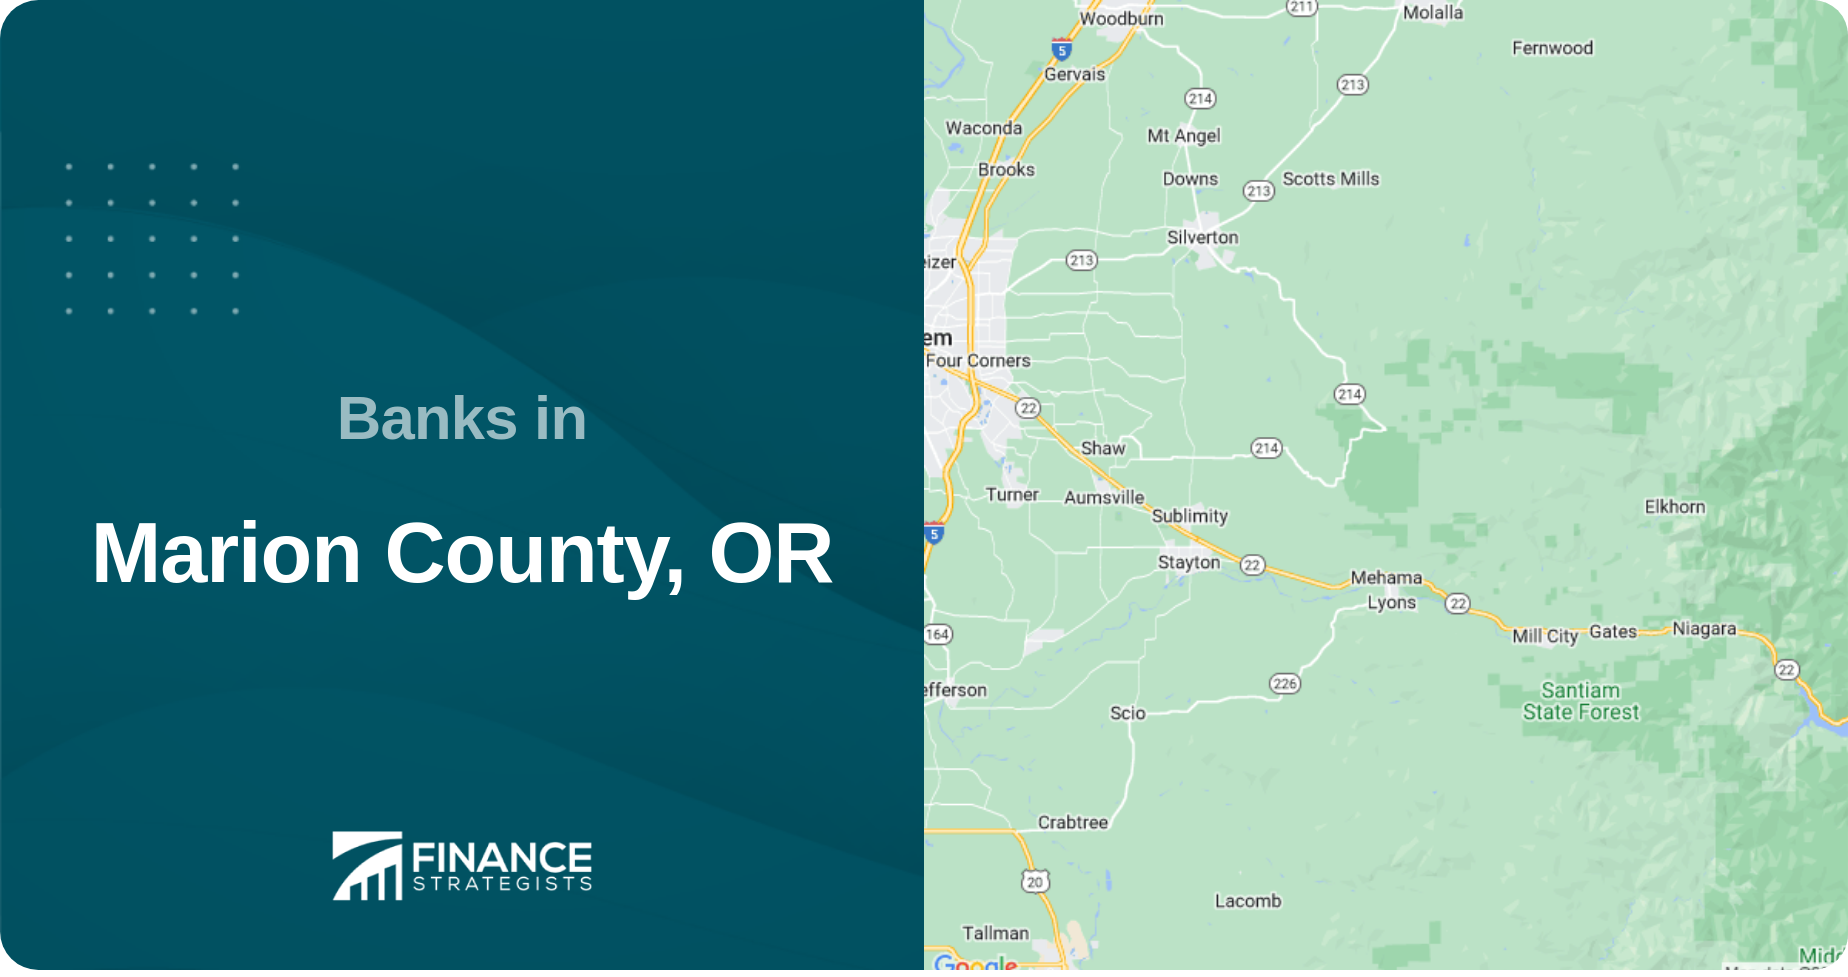 Banks in Marion County, OR